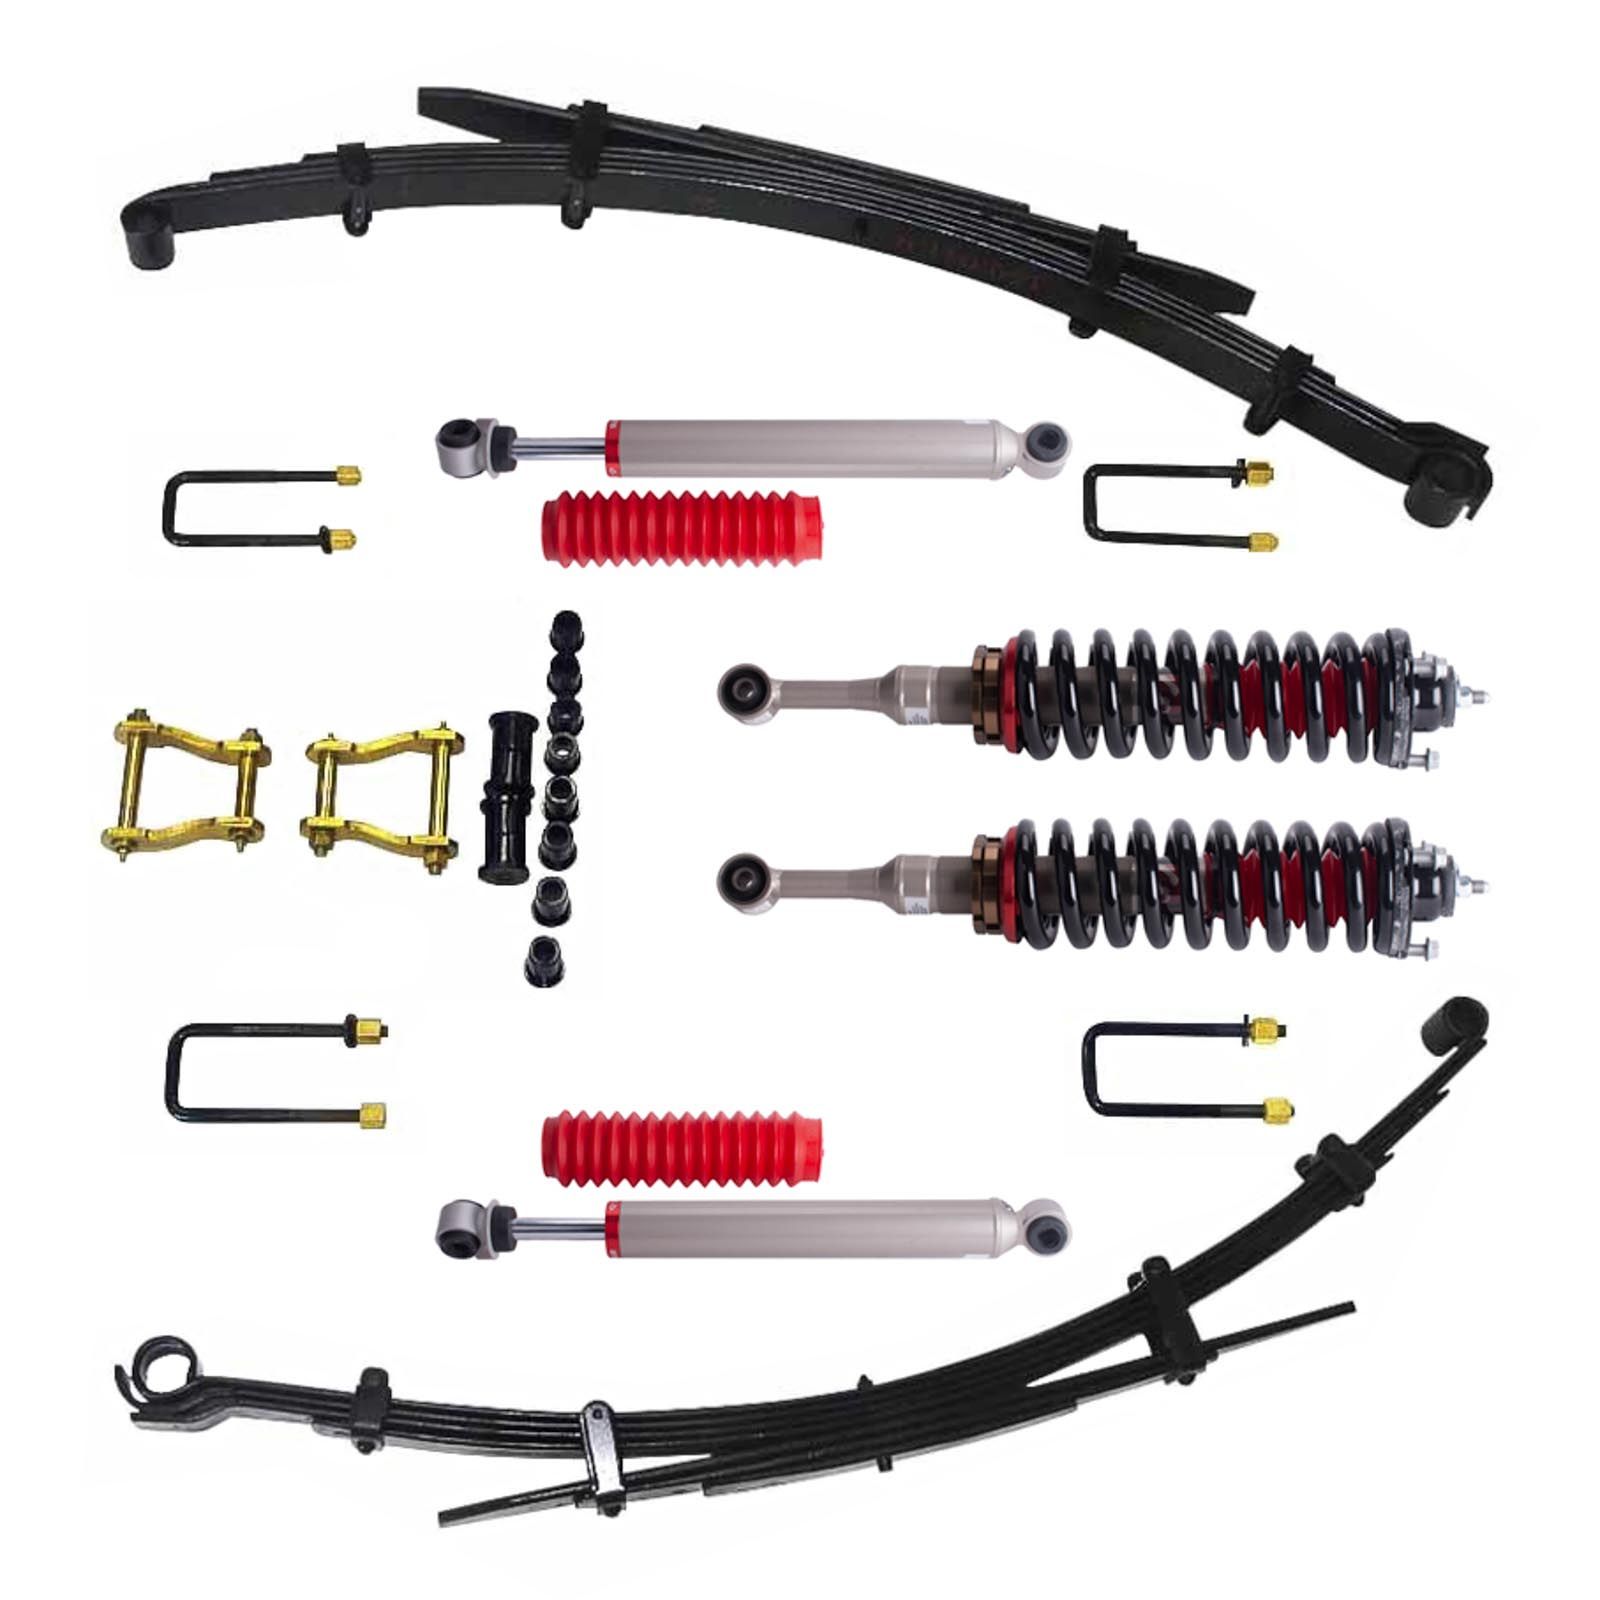 Carbon Offroad adjustable 50-75mm Suspension Kit to suit Holden Colorado 7/2012 and on